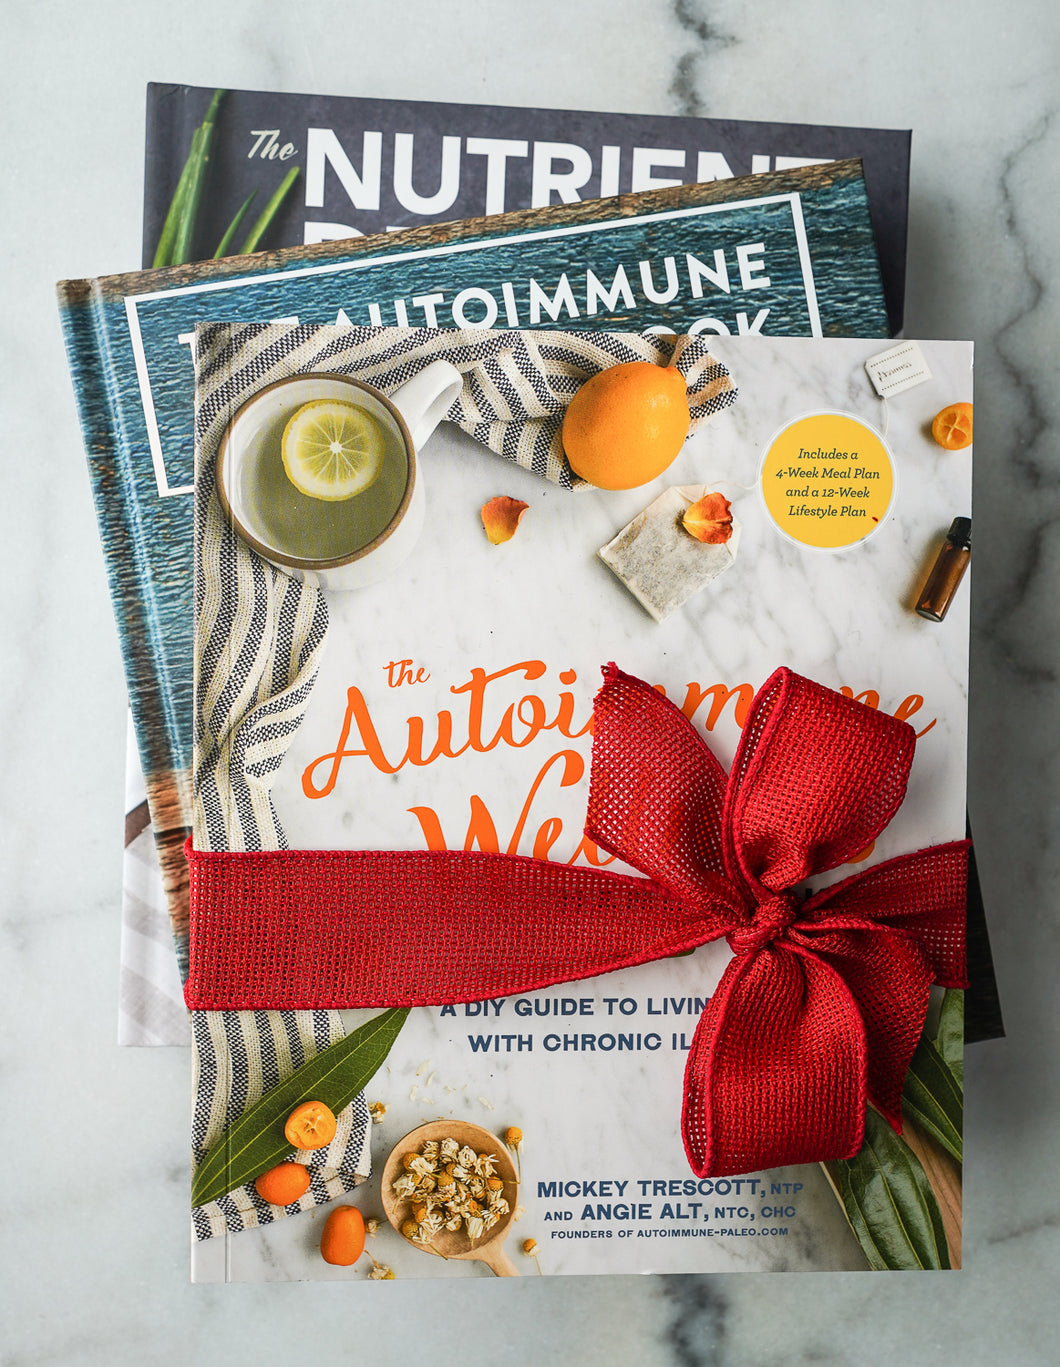 The Autoimmune Paleo Cookbook, The Nutrient-Dense Kitchen, and The Autoimmune Wellness Handbook 3-Book Bundle (Signed & Personalized, Free Shipping)